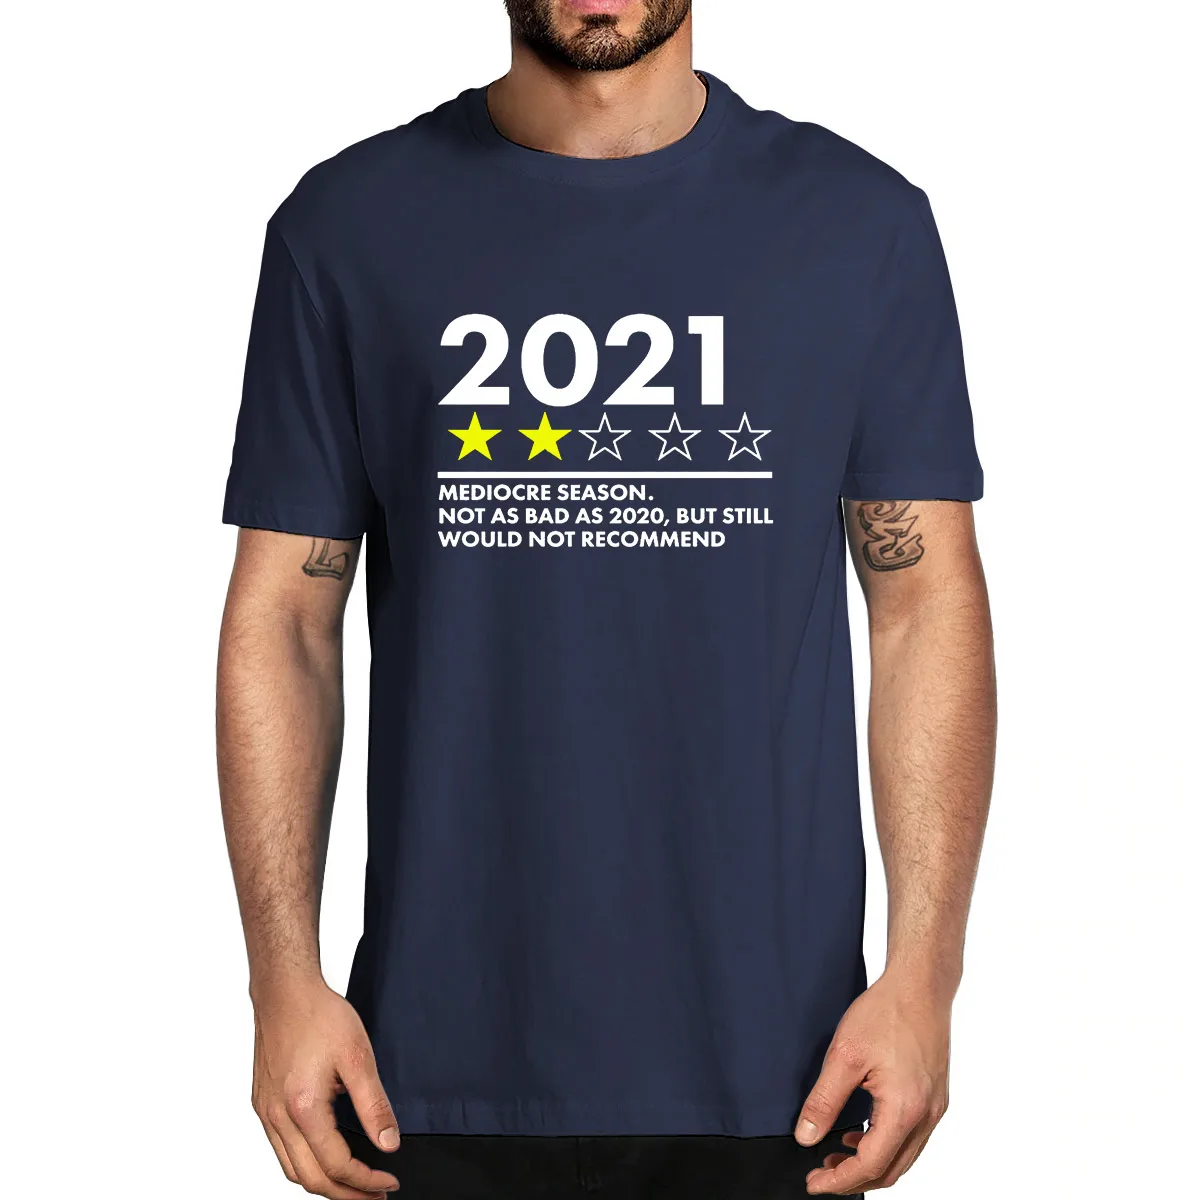 

Summe 2021 Mediocre Season Not As Bad As 2020 But Still Would Not Recommend Men's 100% Cotton Novelty T-Shirt Unisex Humor Tee